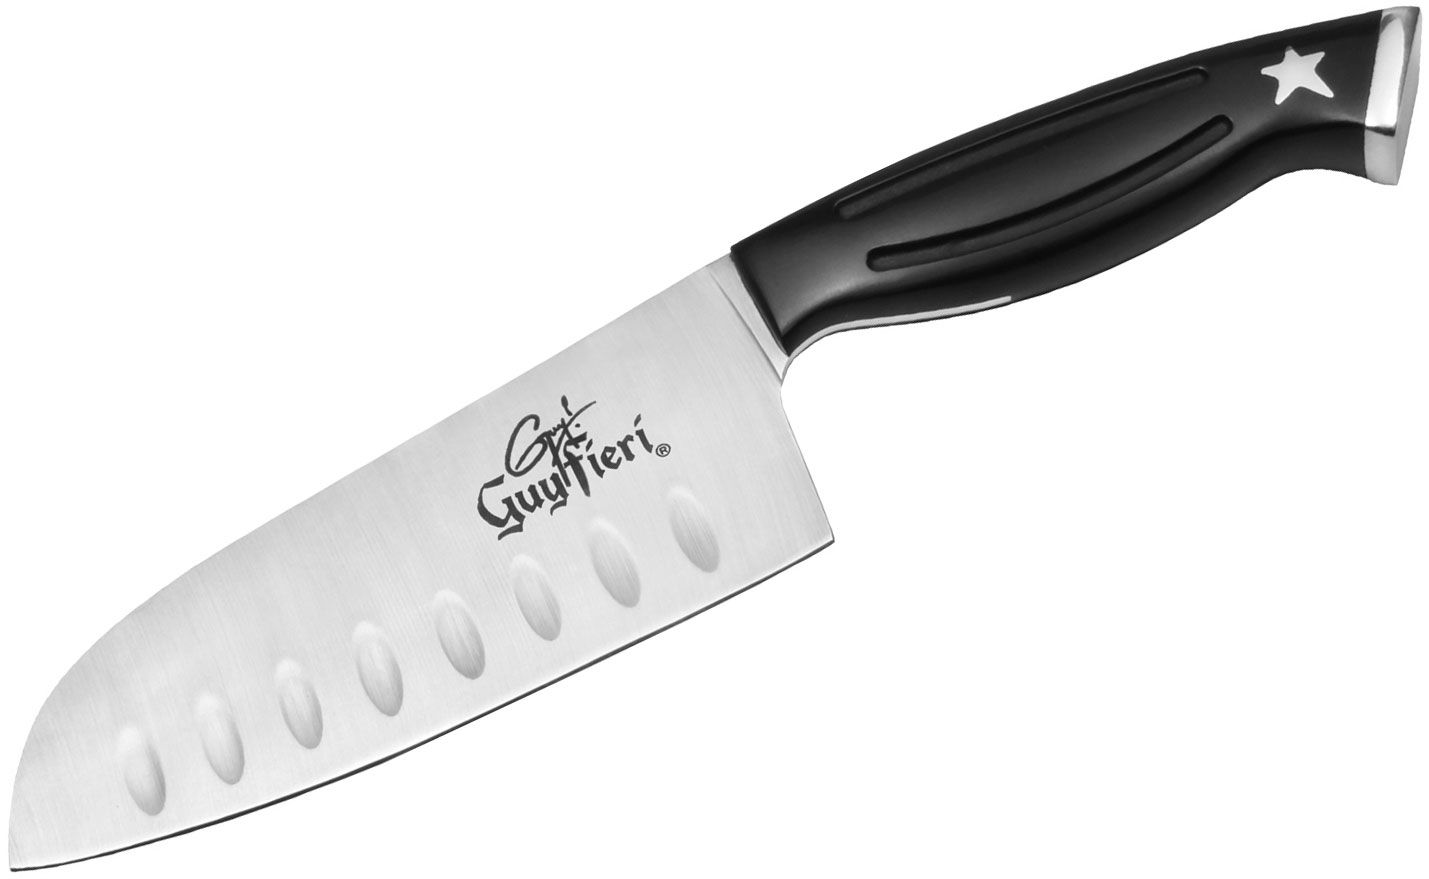 Best Chef Knife by Guy Fieri Review 2017